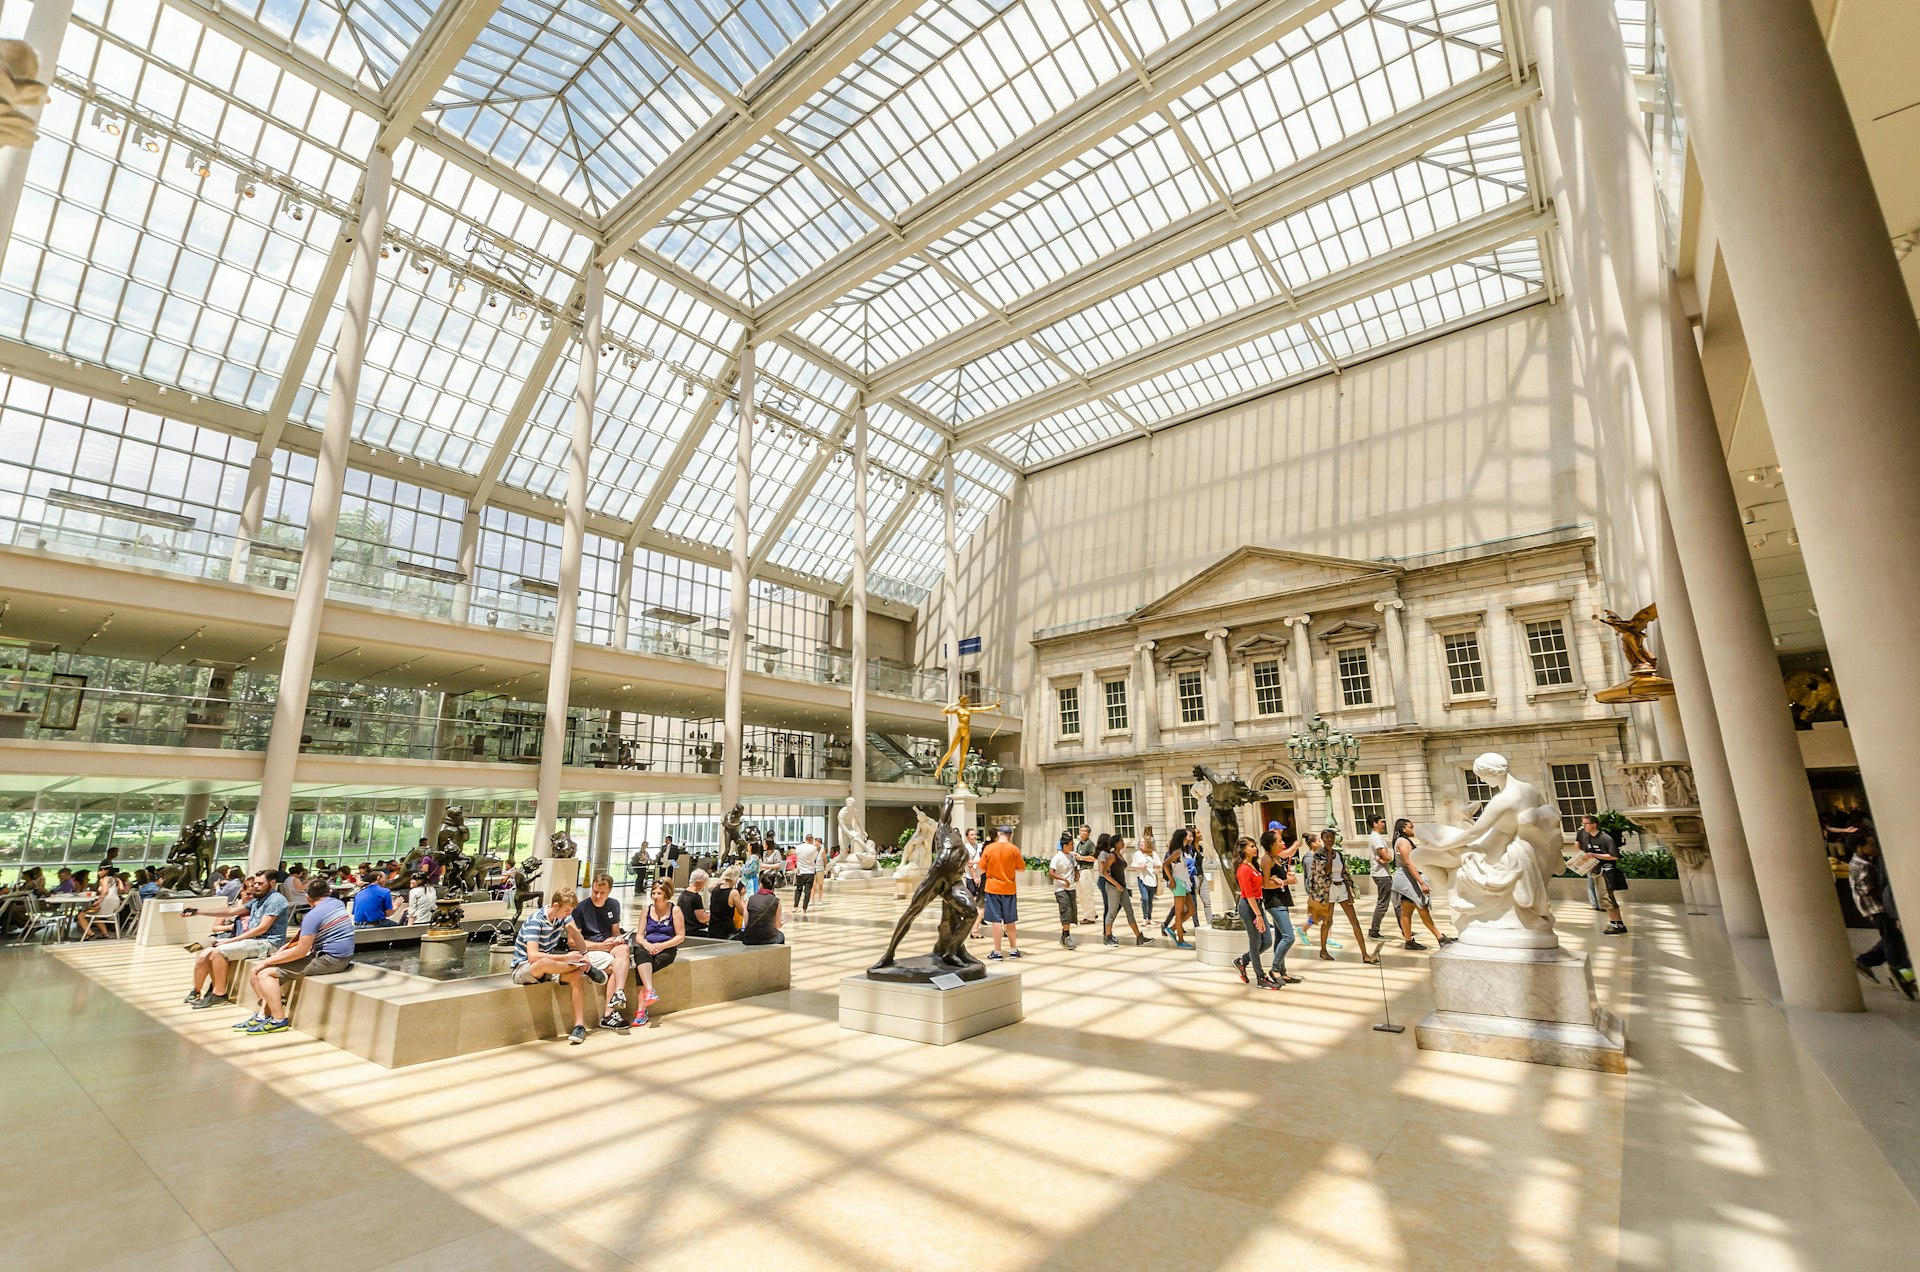 The Charles Engelhard Court in the American Wing of the Metropolitan Museum of Art